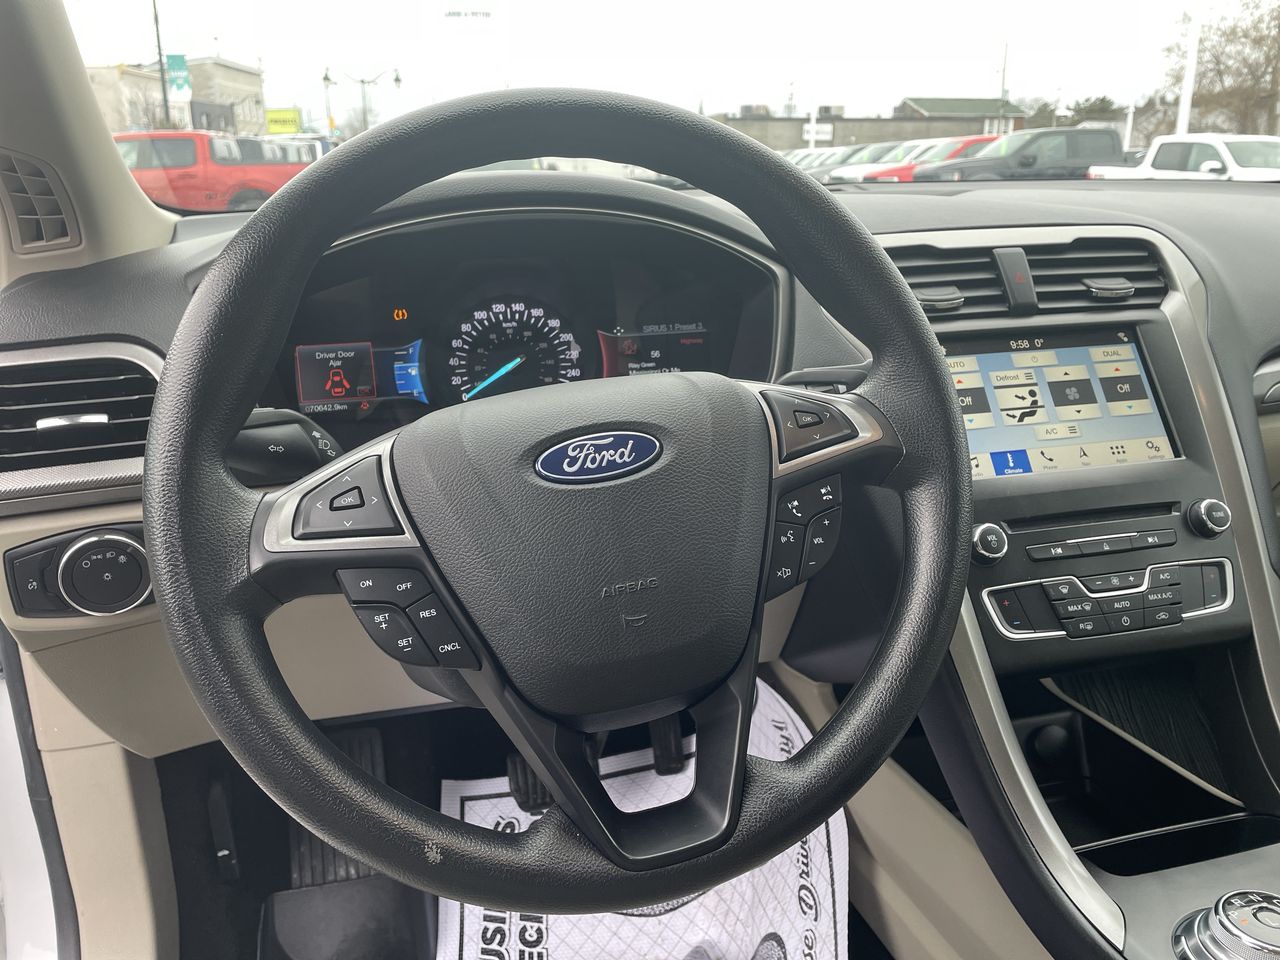 2018 Ford Fusion - P21087 Full Image 14